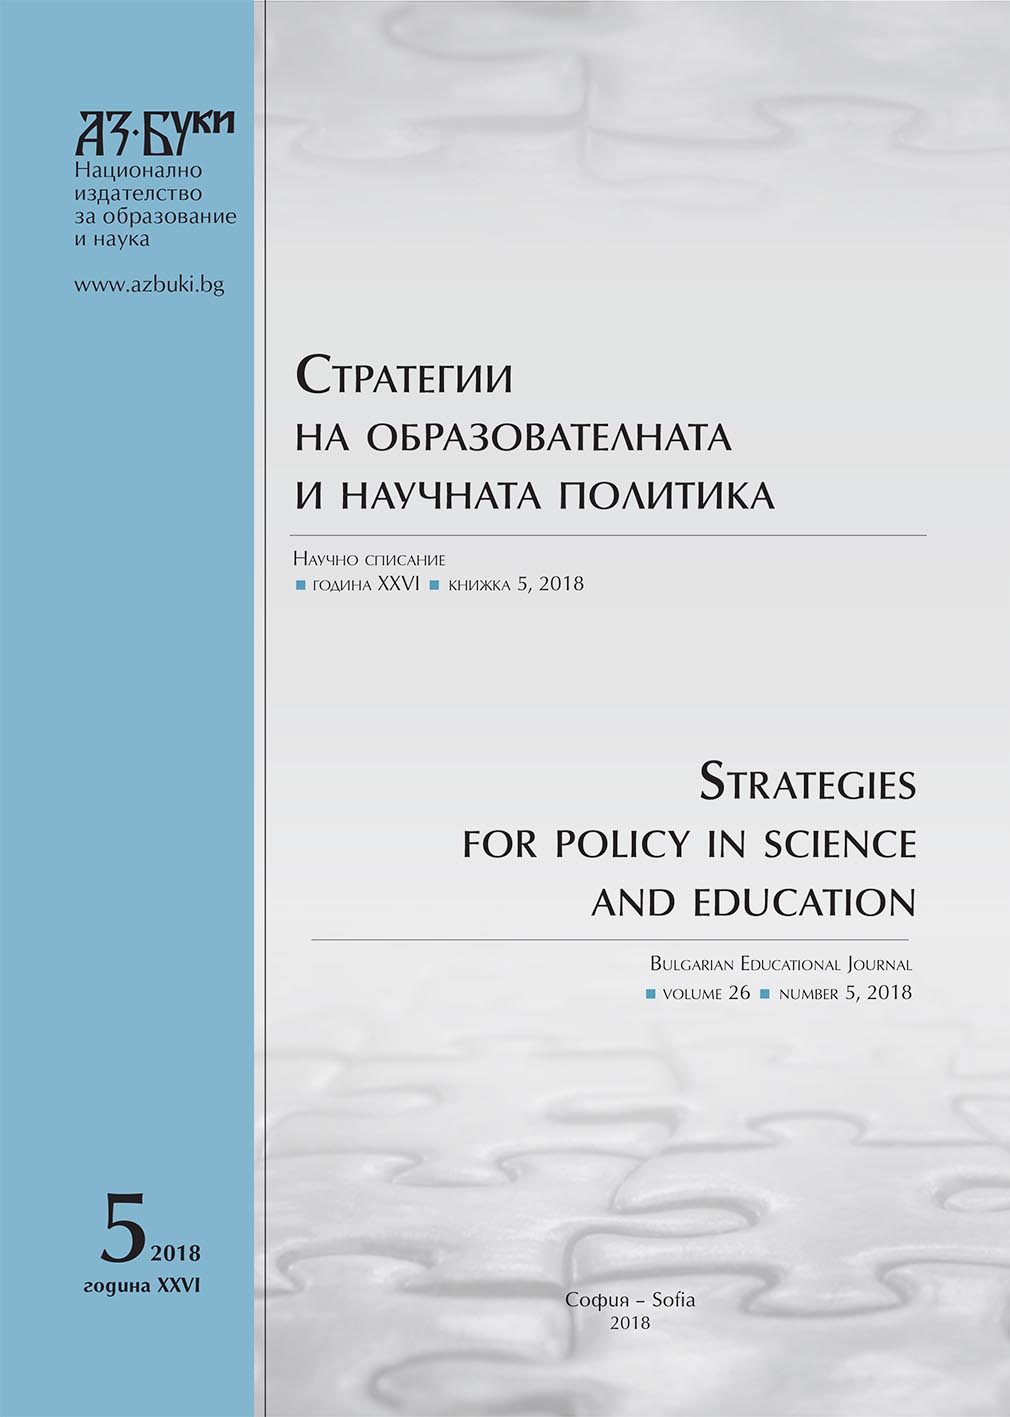 Russian Science Citation Index and the Bulgarian Researchers Cover Image